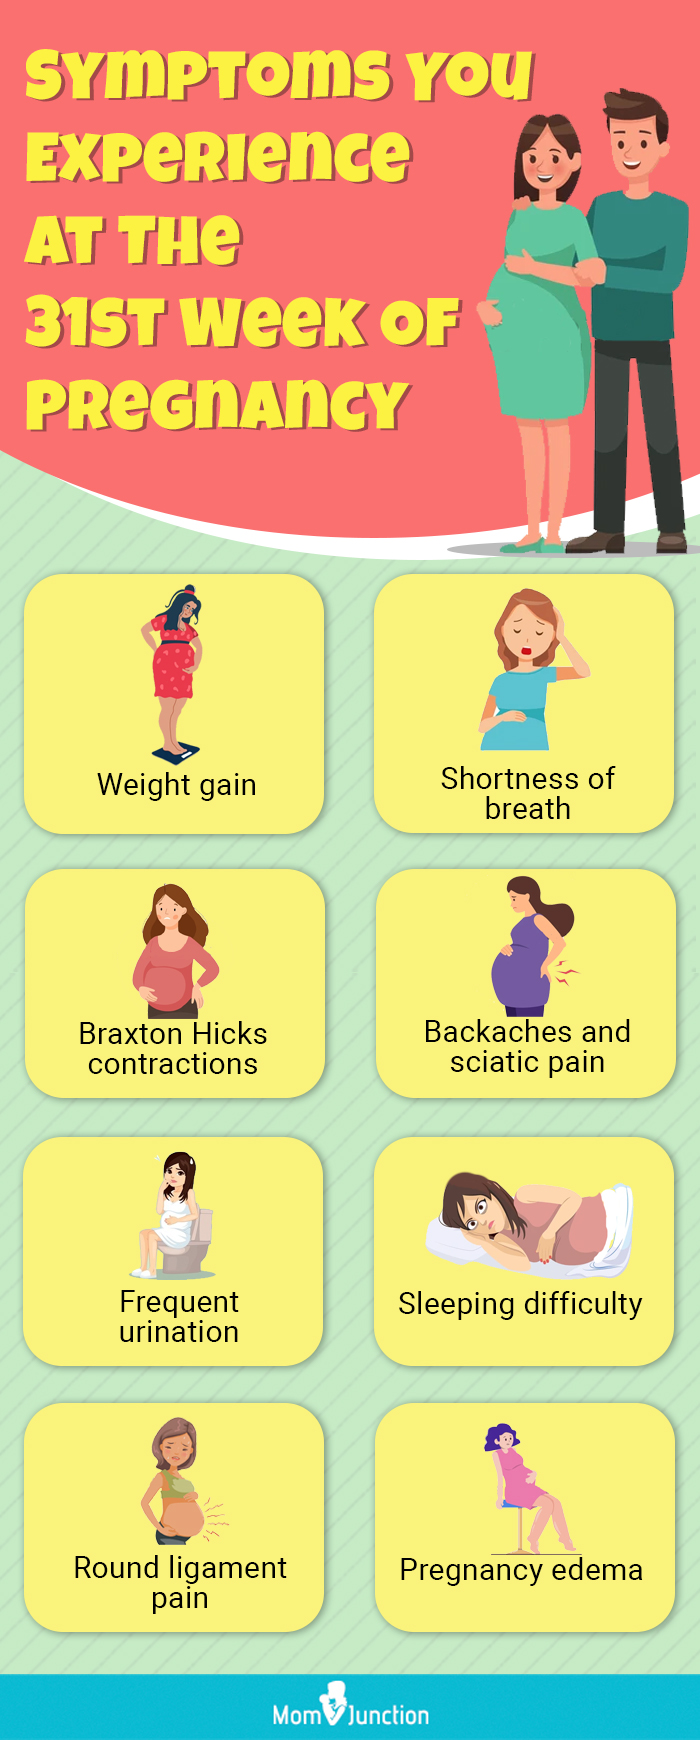 symptoms you experience at the 31st week of pregnancy (infographic)